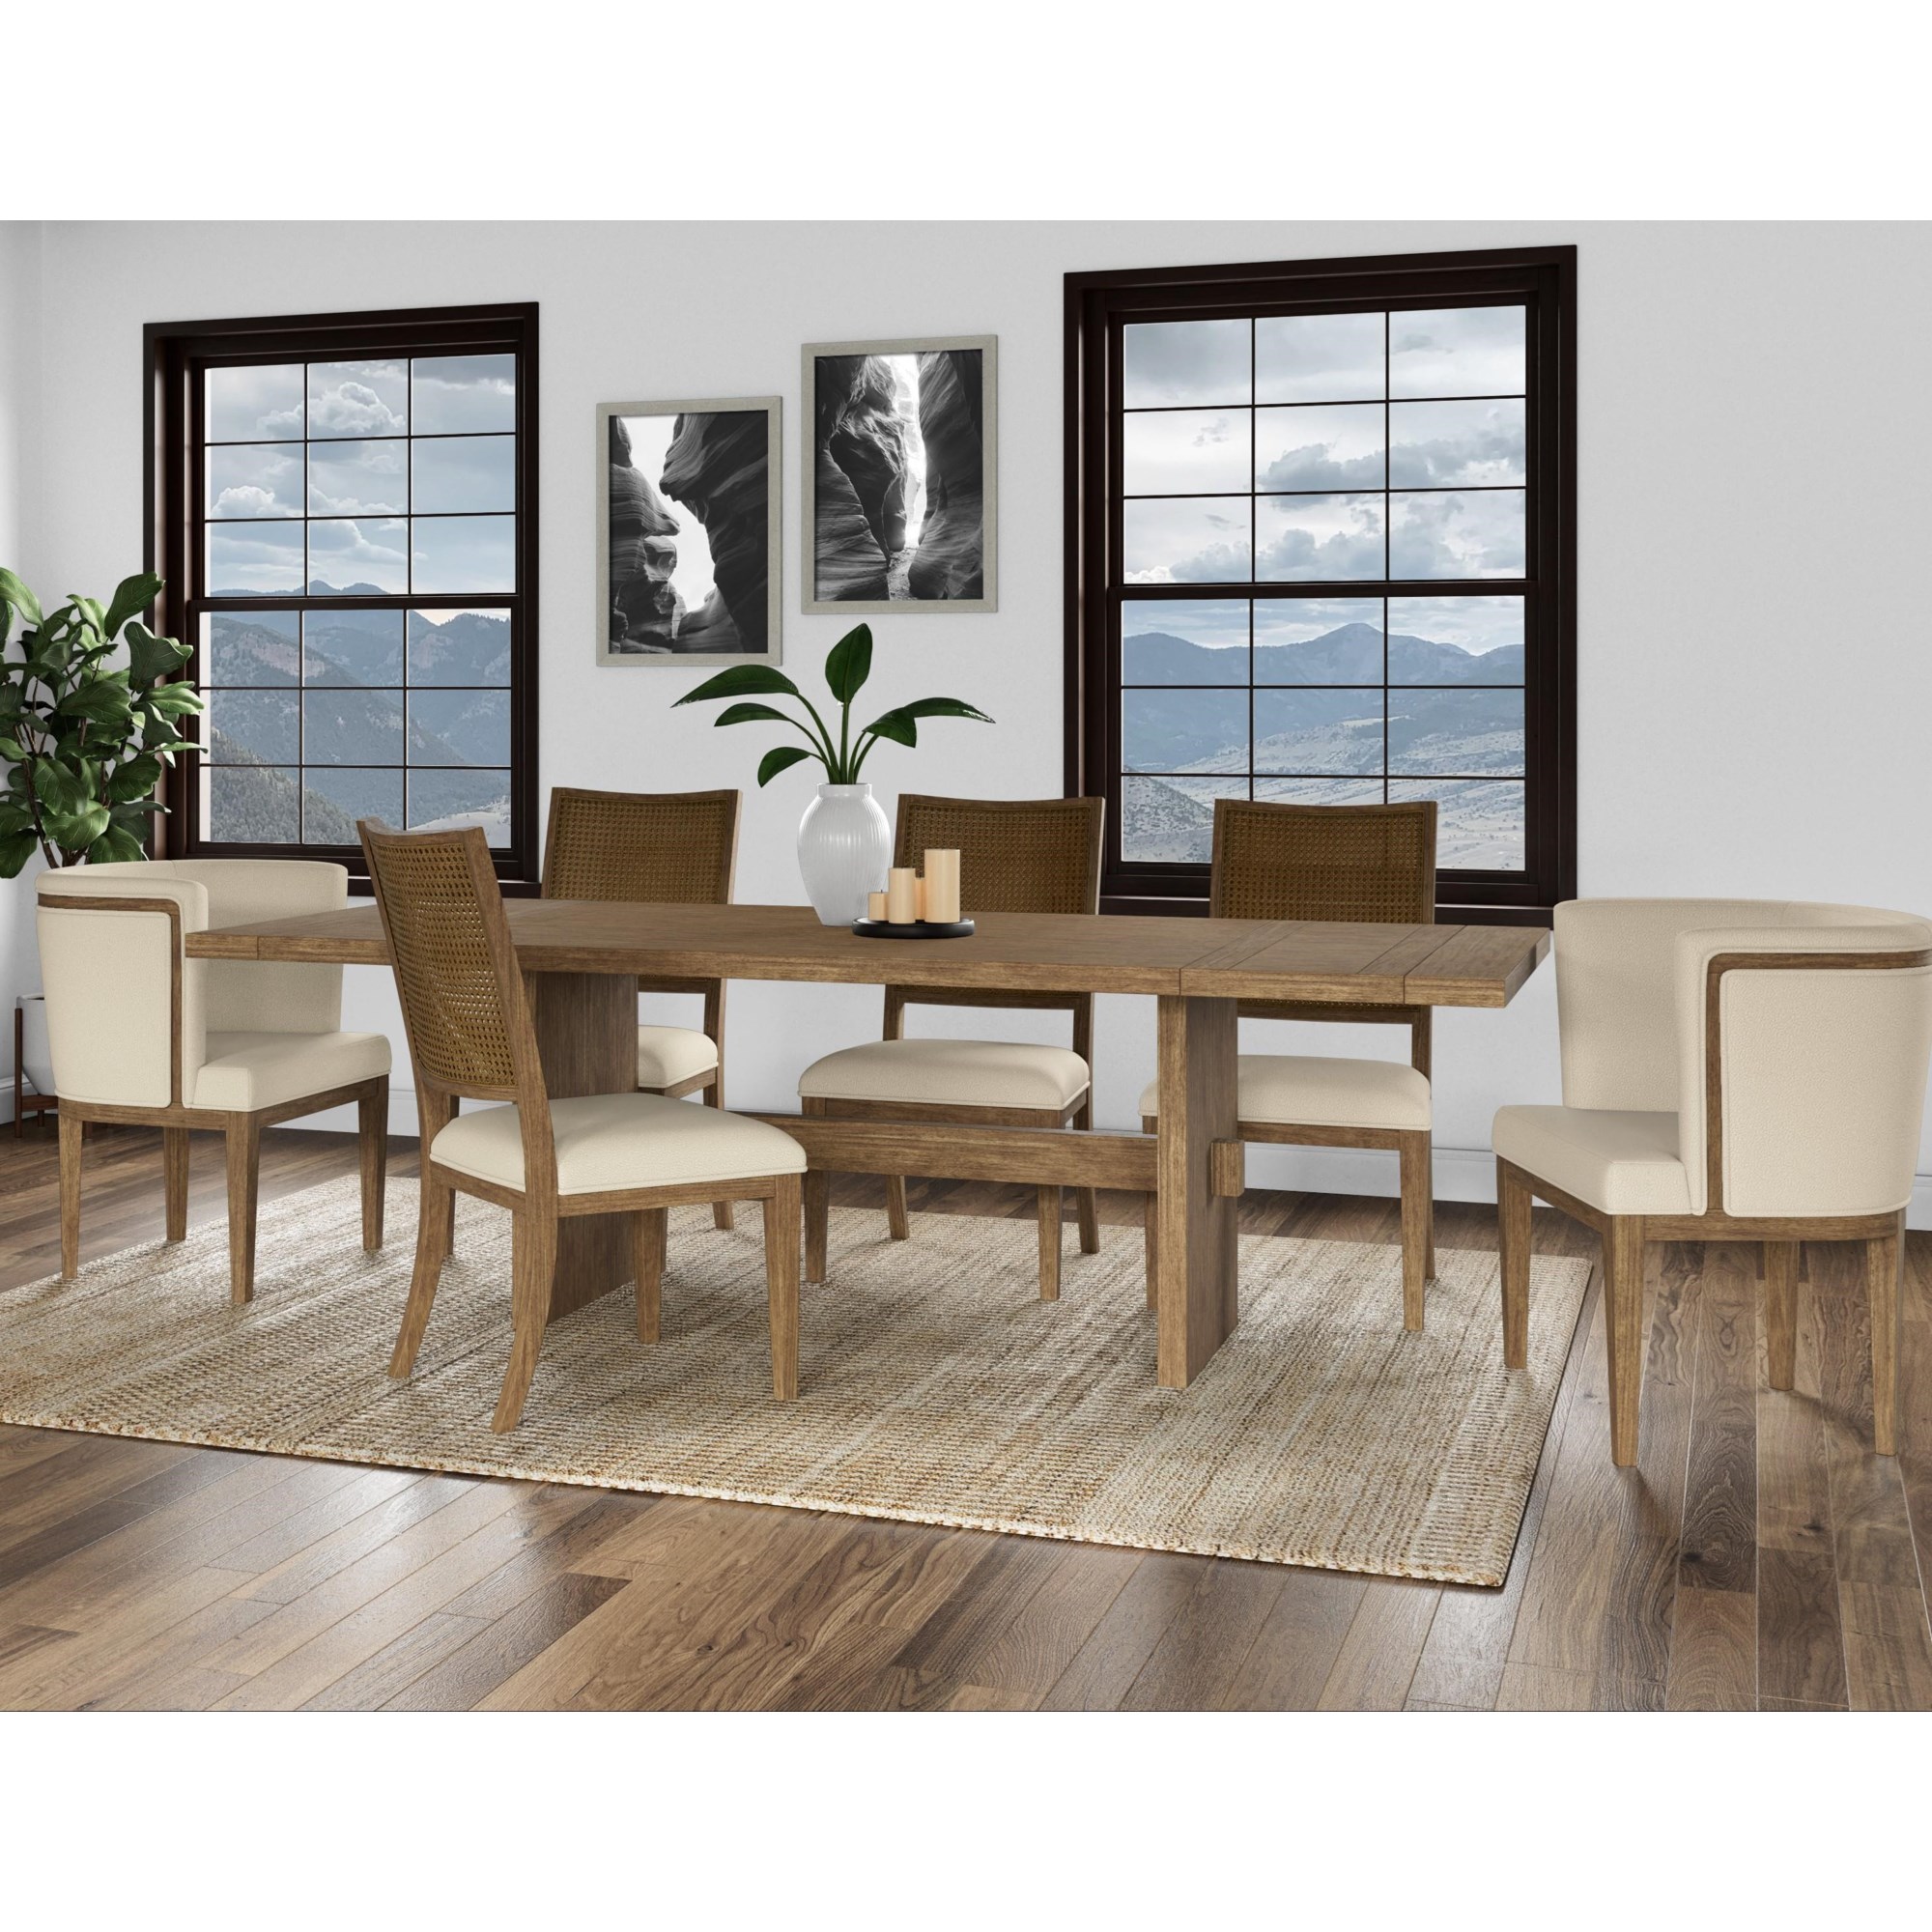 Modern wooden dining table with 4 chairs in light wood colour, oak  burlington